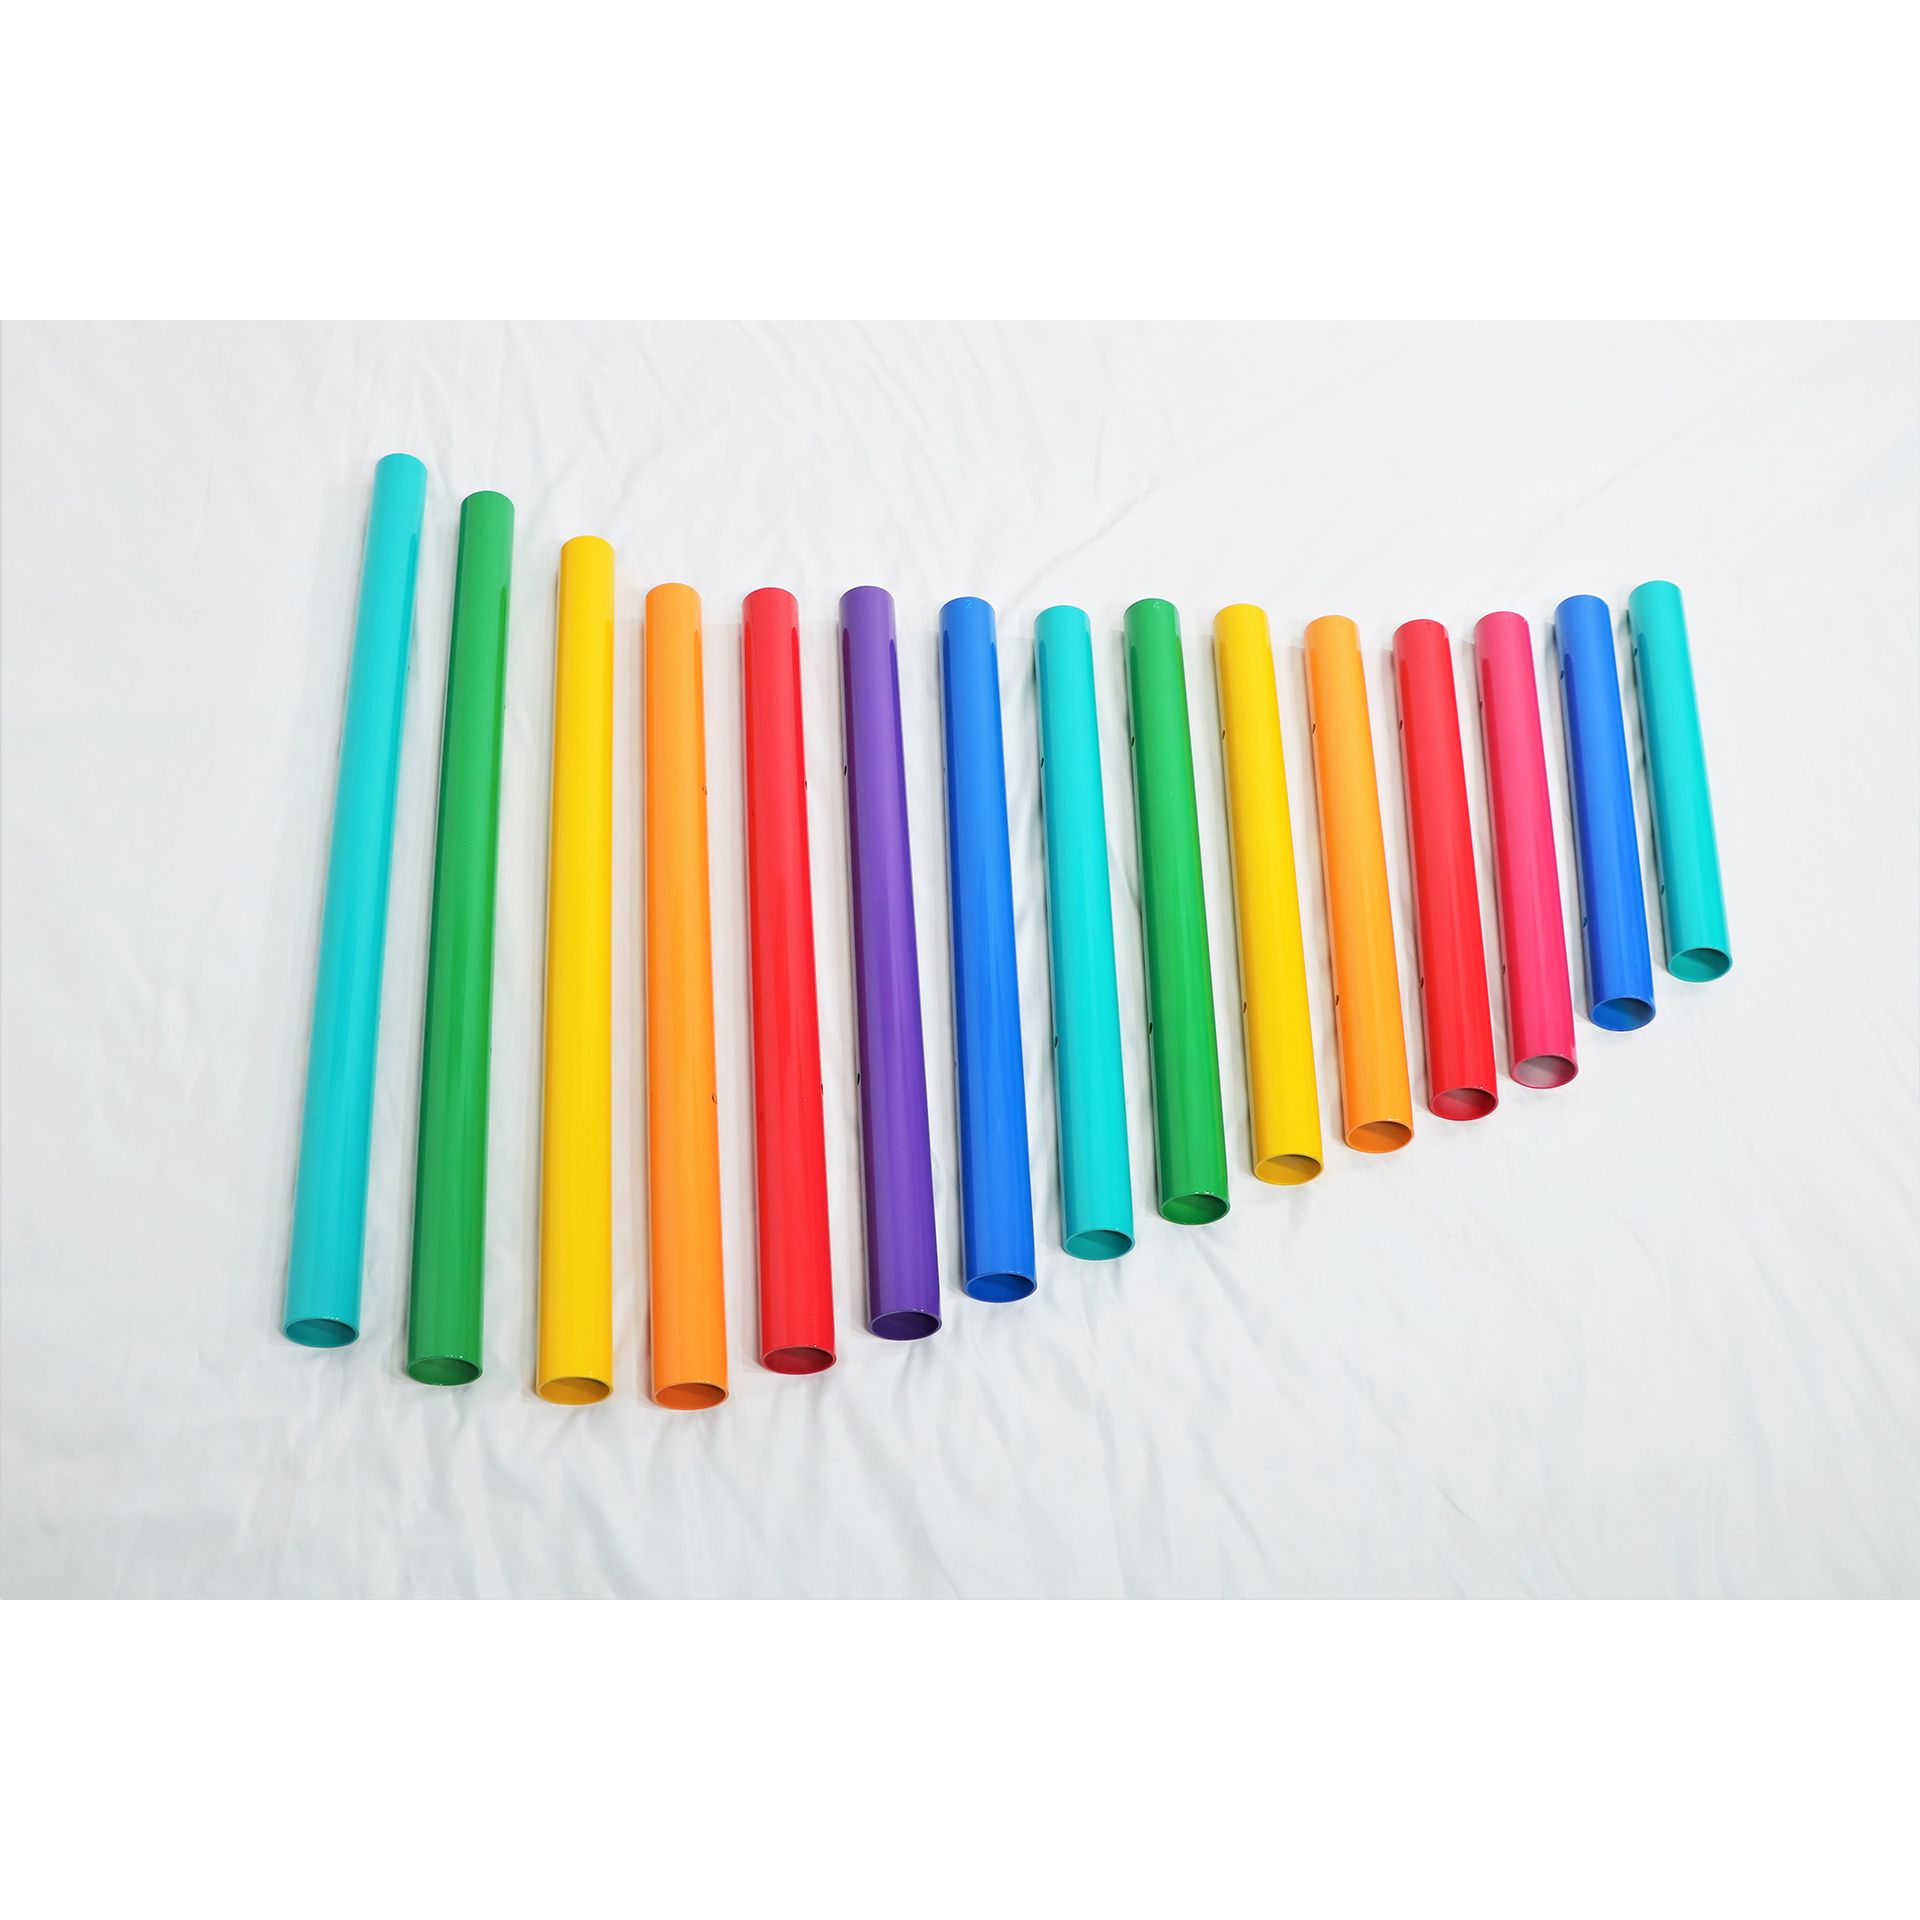 Commercial park colorful standard 15 Note Pipe Xylophone accessories